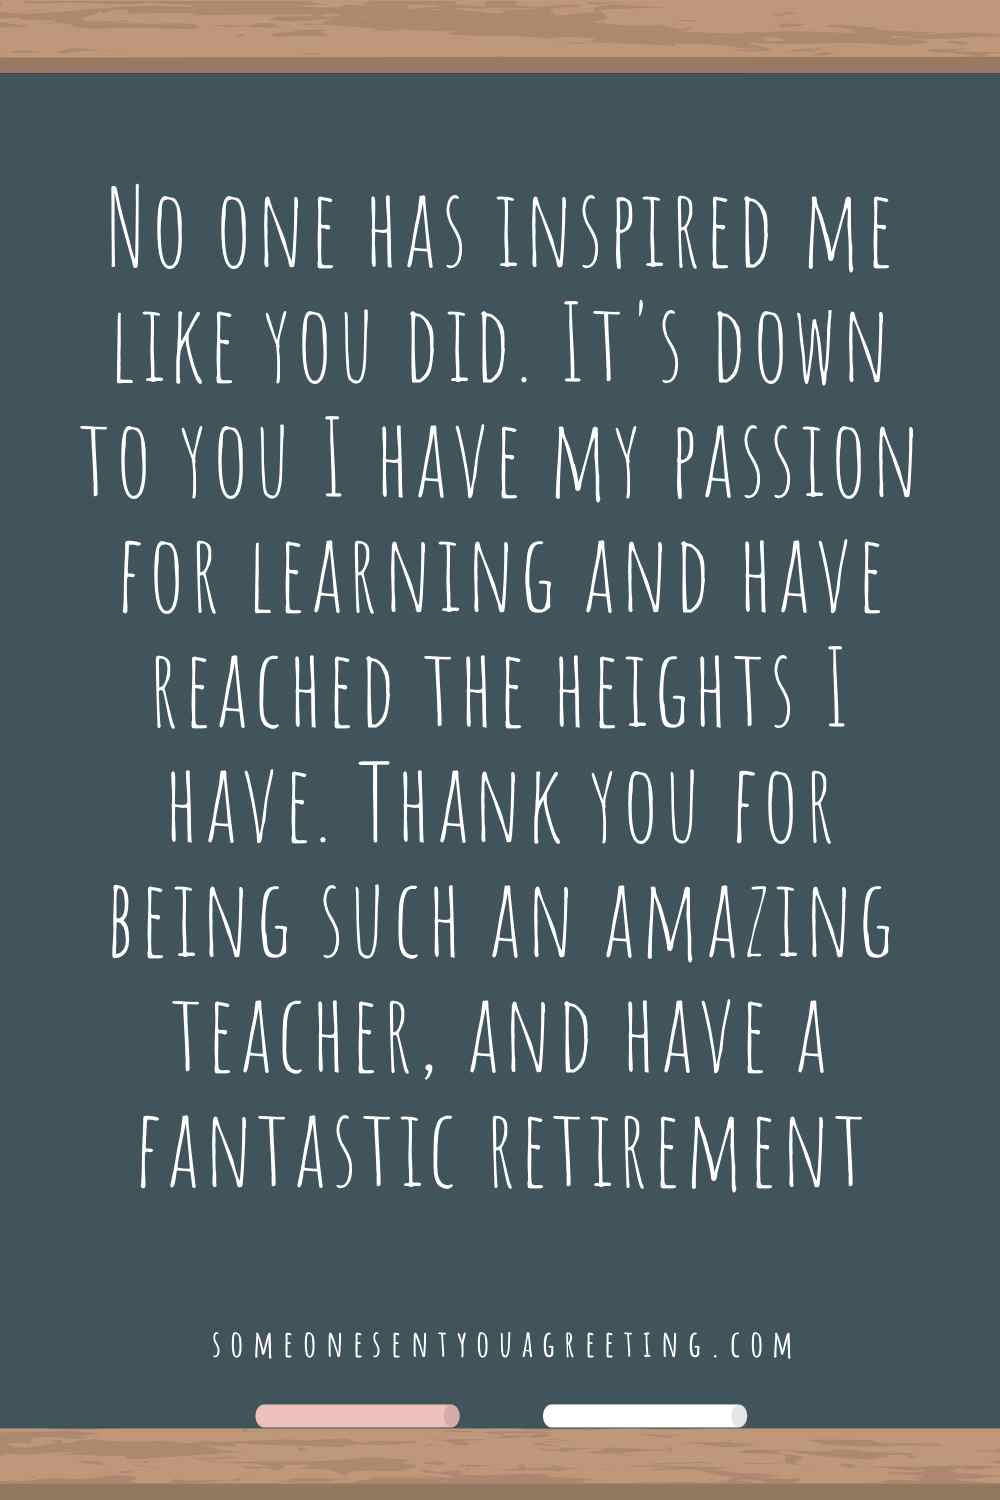 Retirement wishes for a teacher